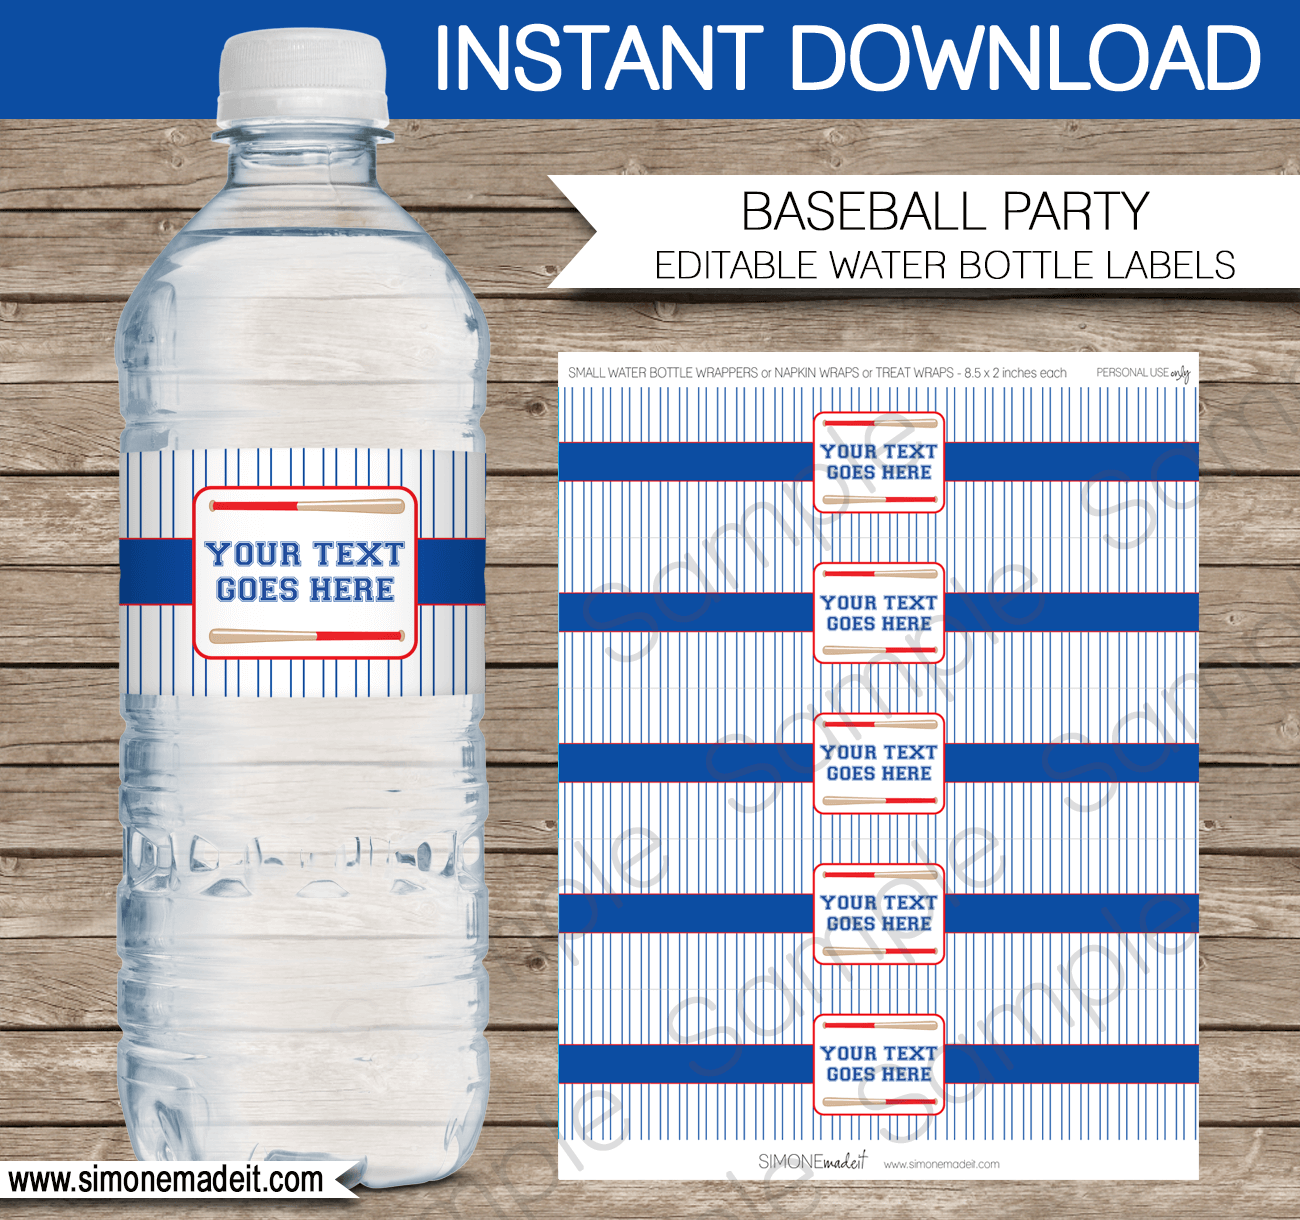 Baseball Party Water Bottle Labels | Birthday Party | Editable DIY Template | $3.00 INSTANT DOWNLOAD via SIMONEmadeit.com